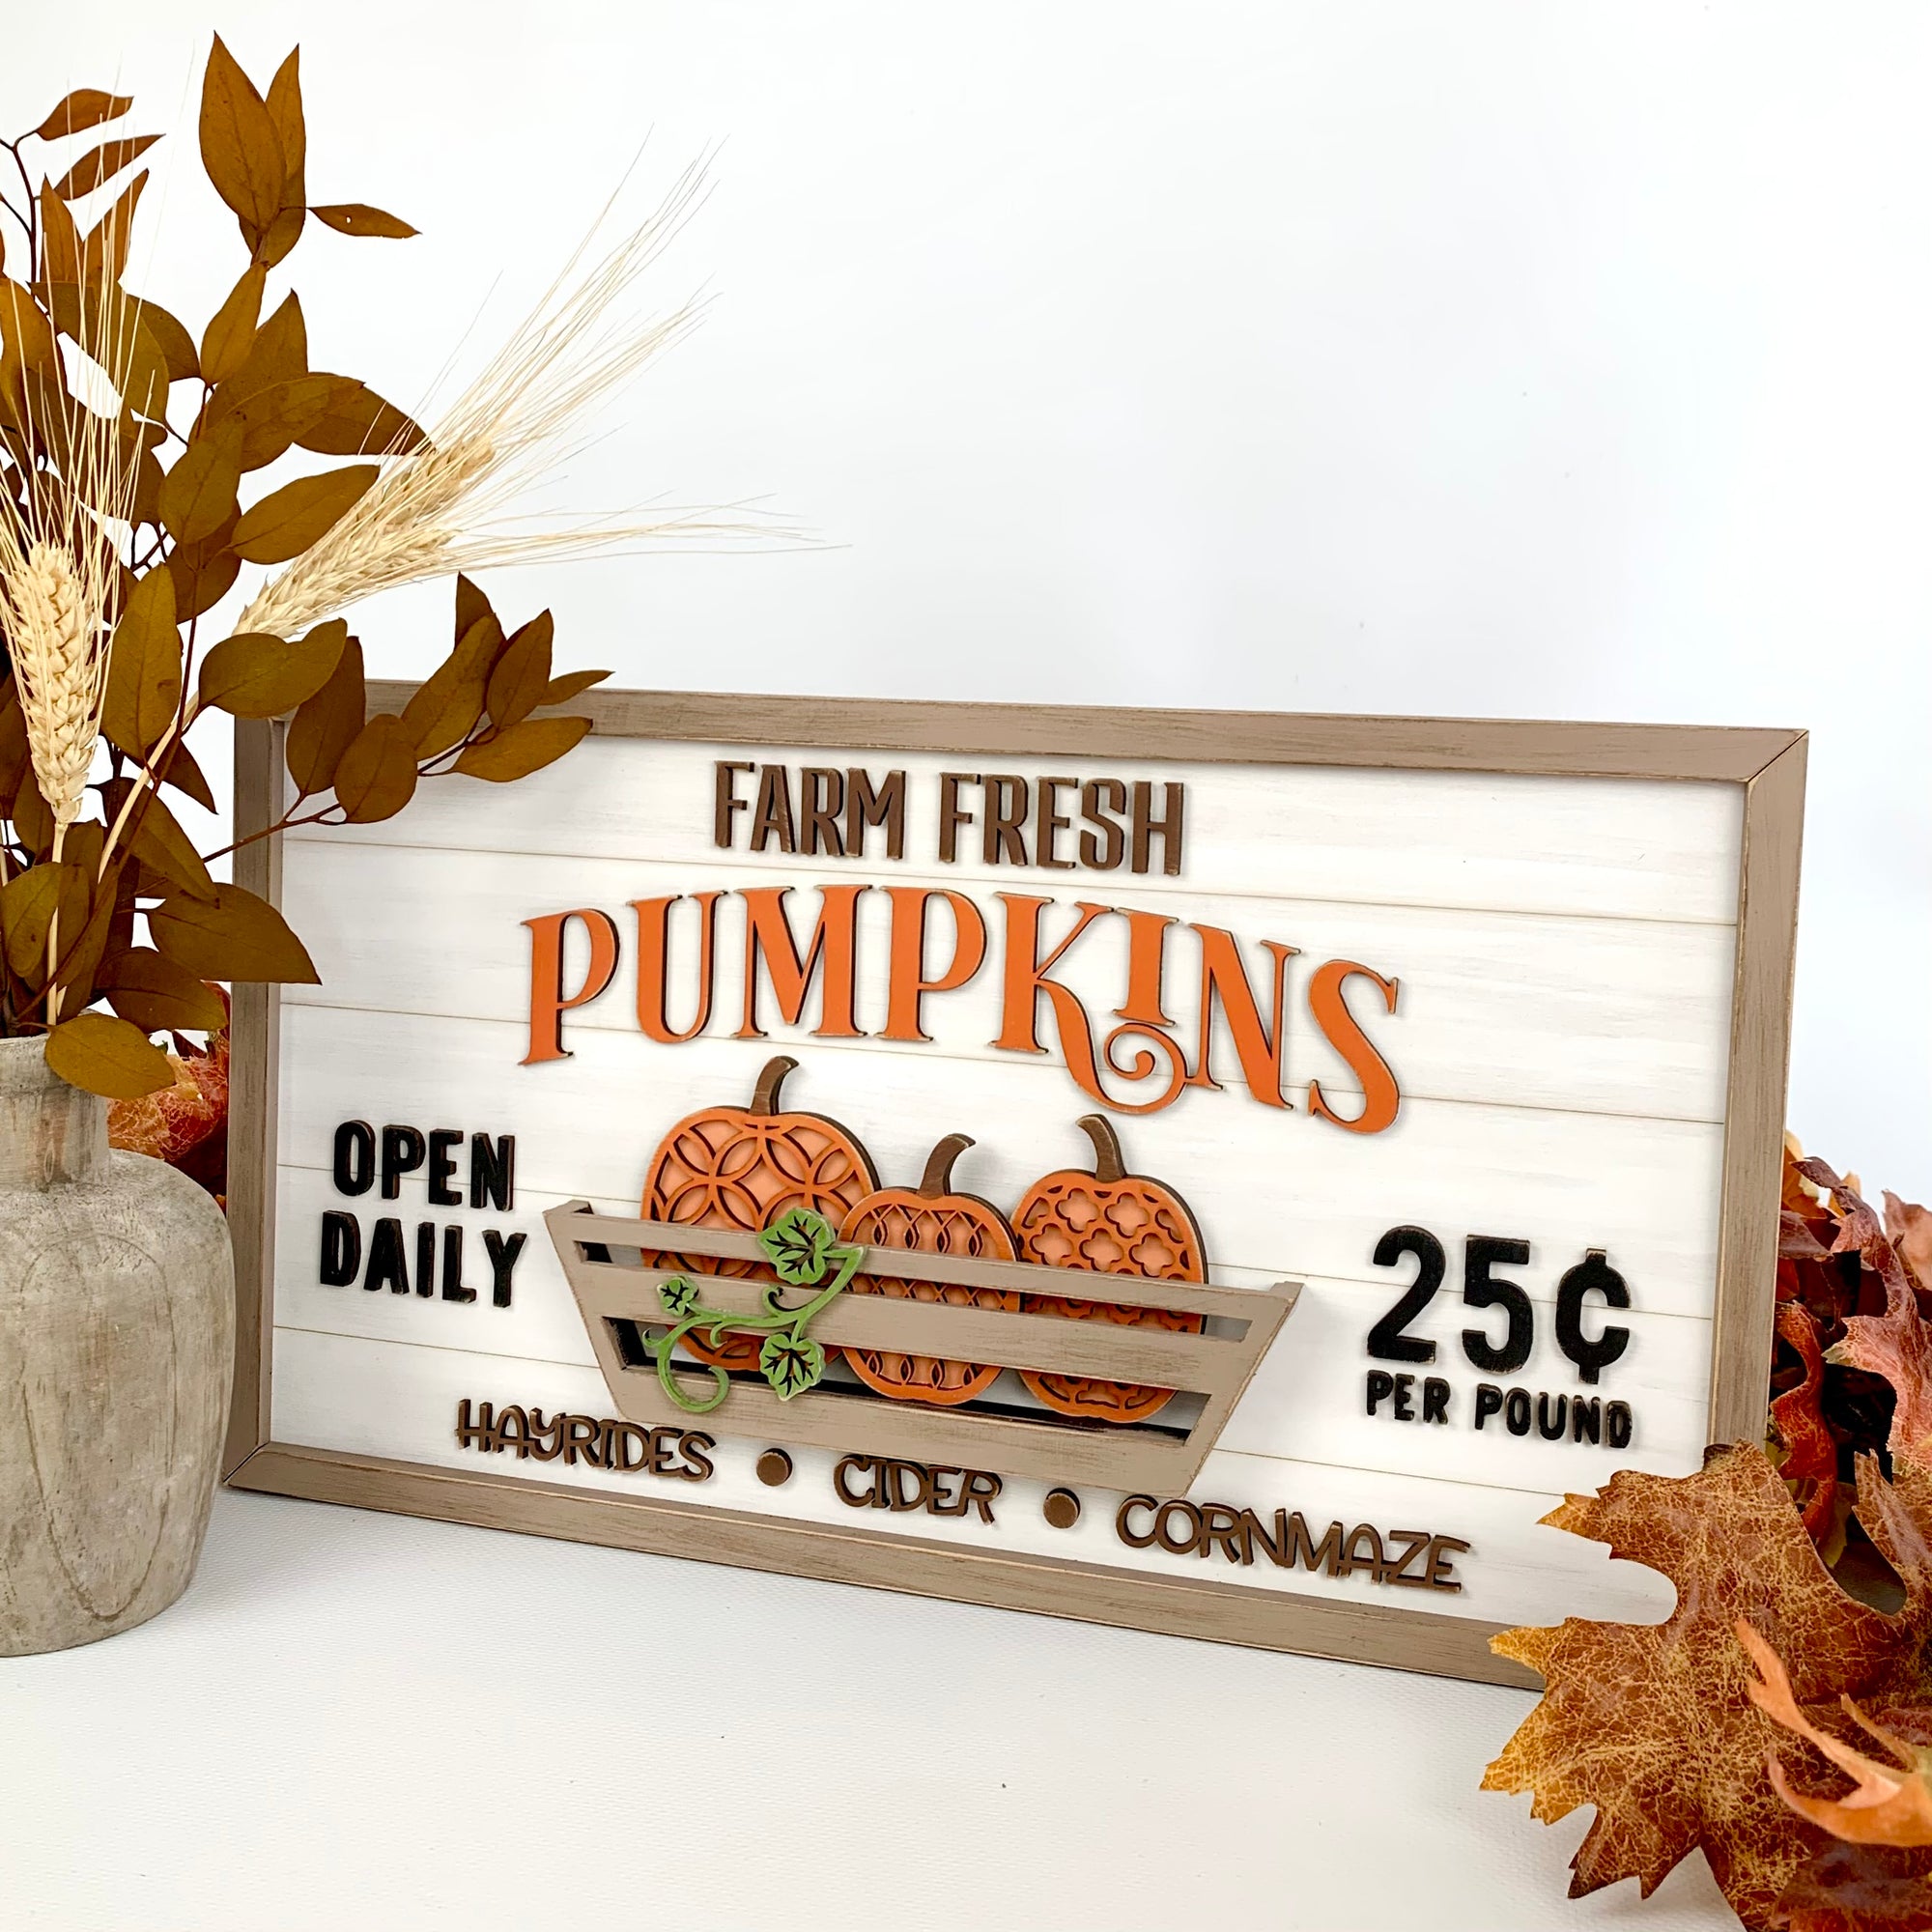 Fresh Pumkins wood shiplap sign decoration for a mantel, countertop, or shelf. Sign with pumpkins in a basket. Farm fresh pumpkins wood sign for fall decorating.